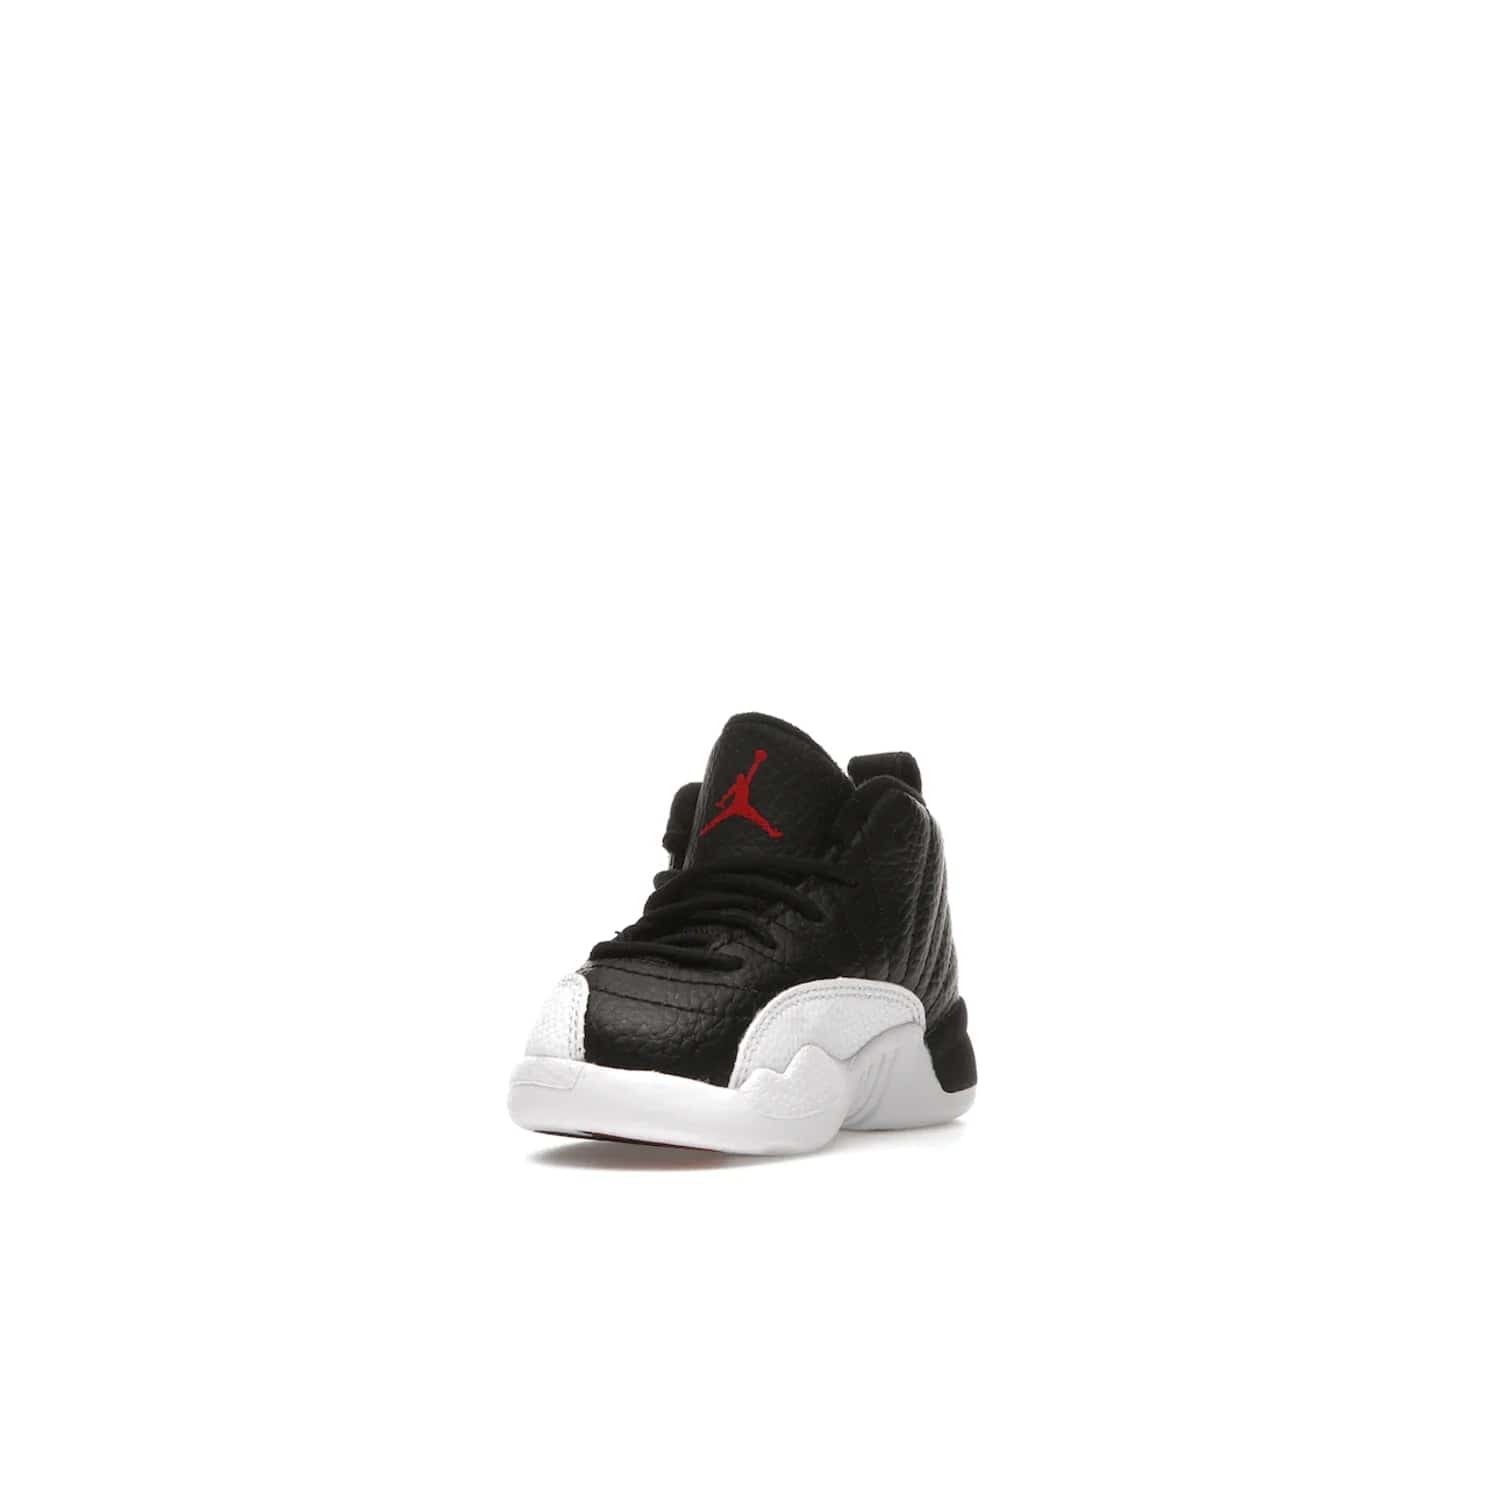 Jordan 12 Retro Playoffs (2022) (TD) - Image 13 - Only at www.BallersClubKickz.com - Stay stylish with the Air Jordan 12 Retro Playoffs 2022 (TD) toddler shoe. All-black upper with red and white accents plus subtle gold details. Bright white midsole and sole. Perfect for any outing or special event.